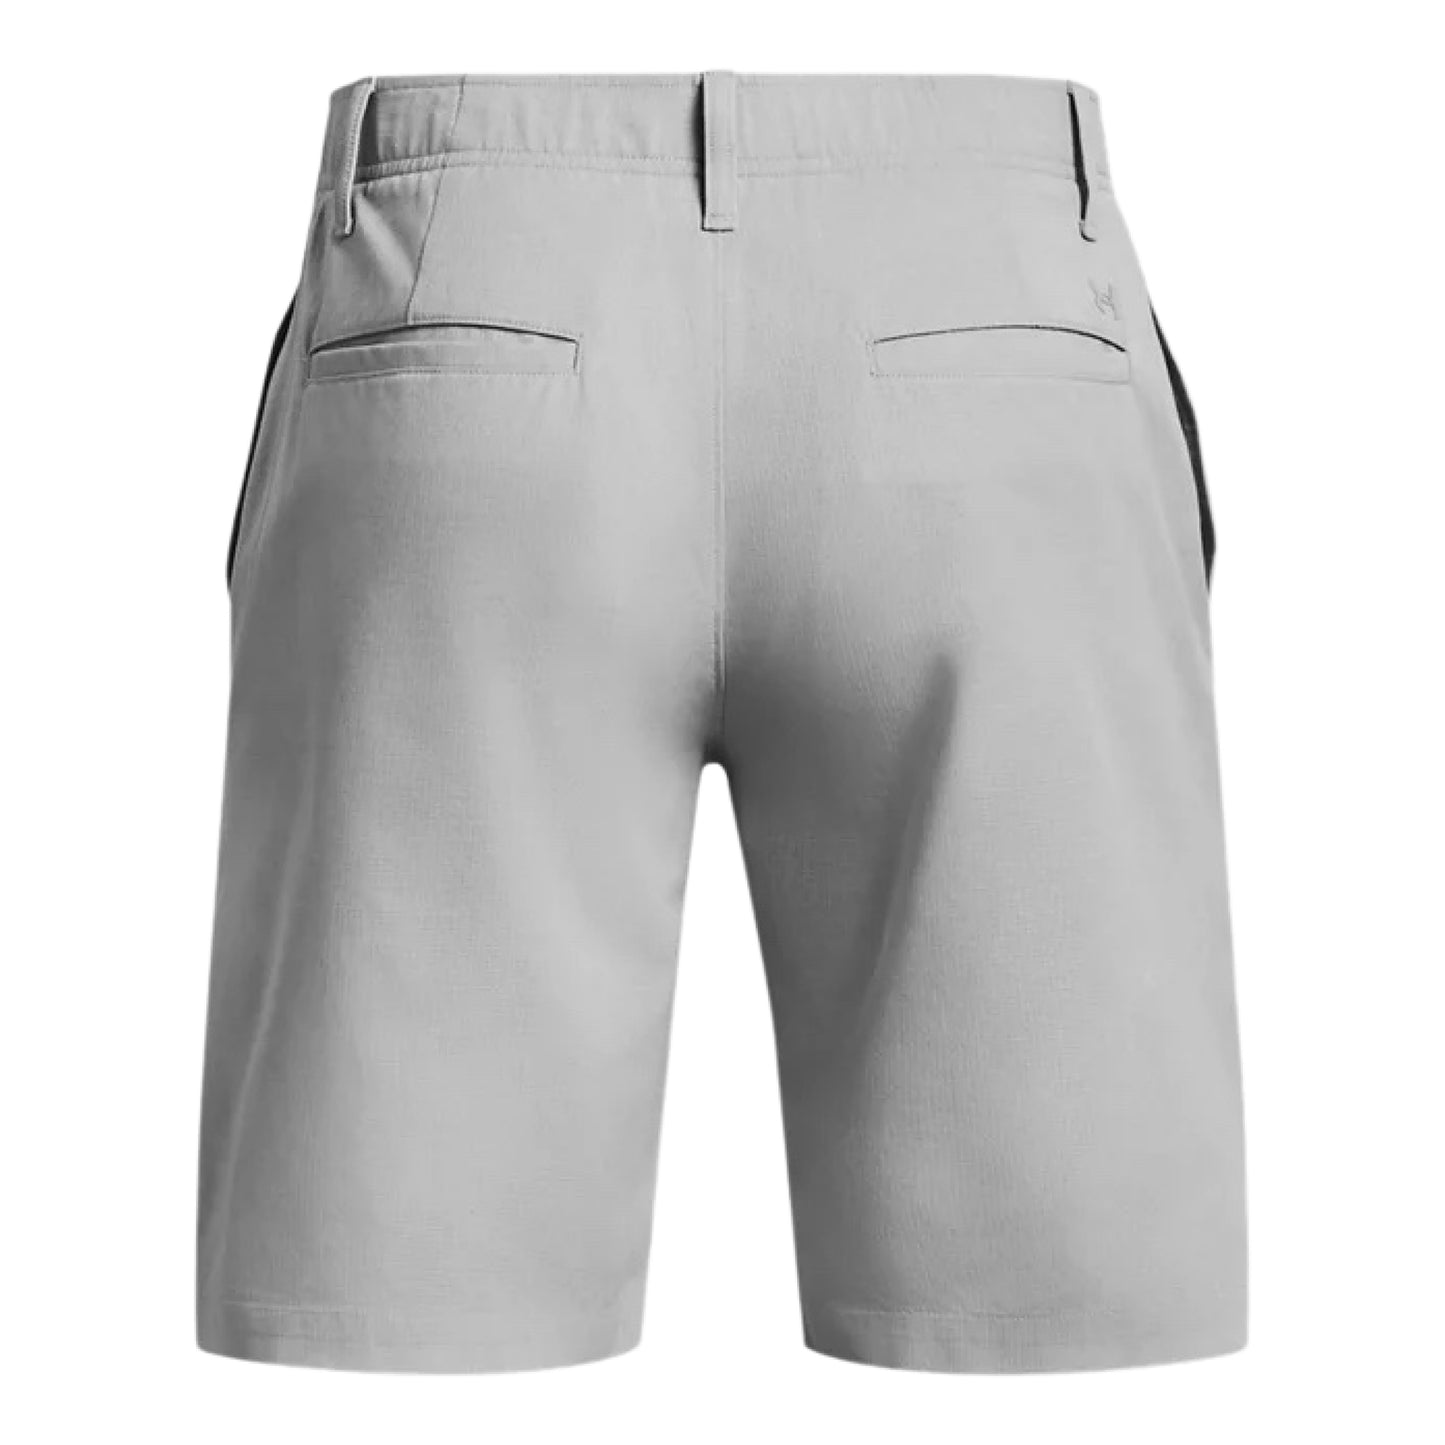 Under Armour Golf Vented Shorts Mod Grey